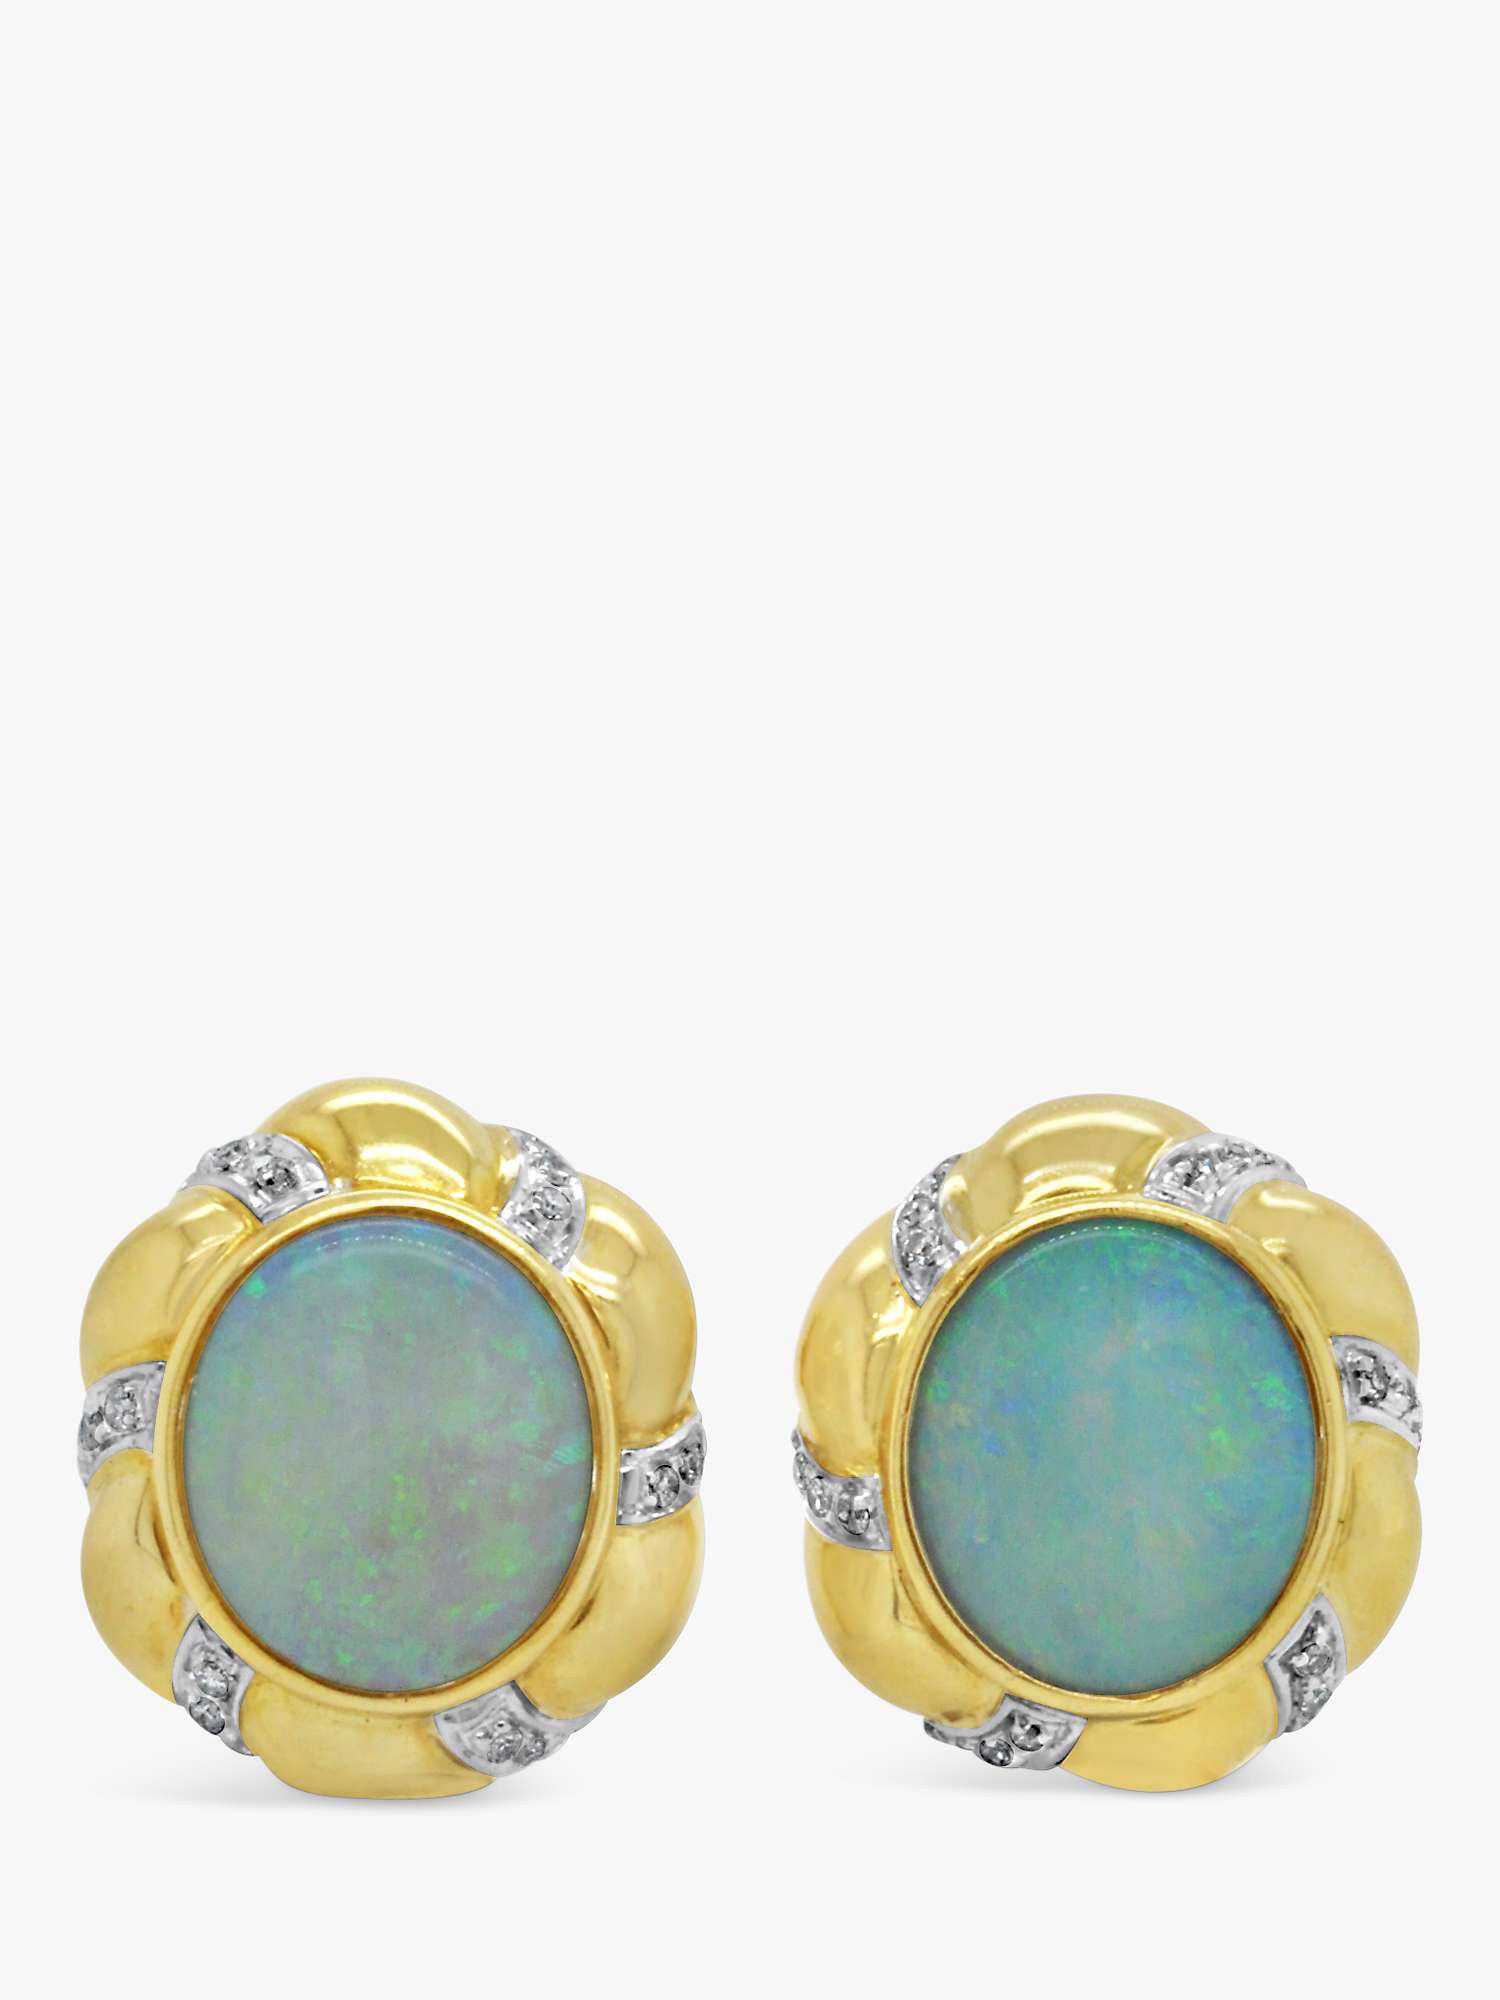 Buy Milton & Humble Jewellery Second Hand 18ct Yellow Gold Opal & Diamond Stud Earrings, Gold Online at johnlewis.com